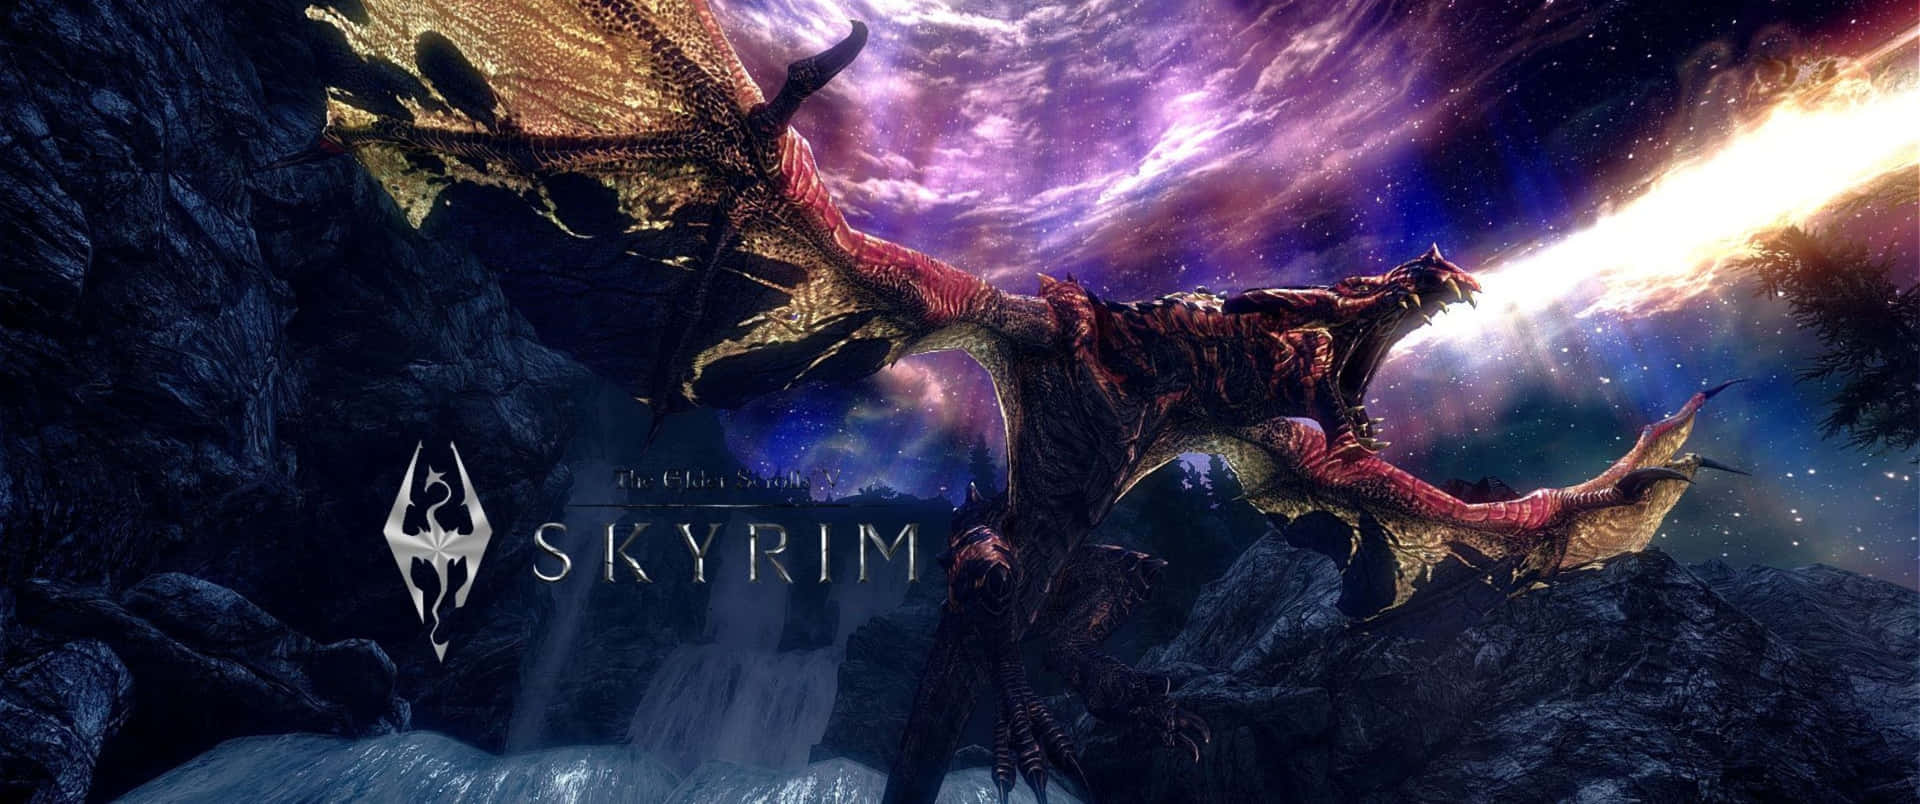 Explore The World Of Skyrim At 3440x1440p